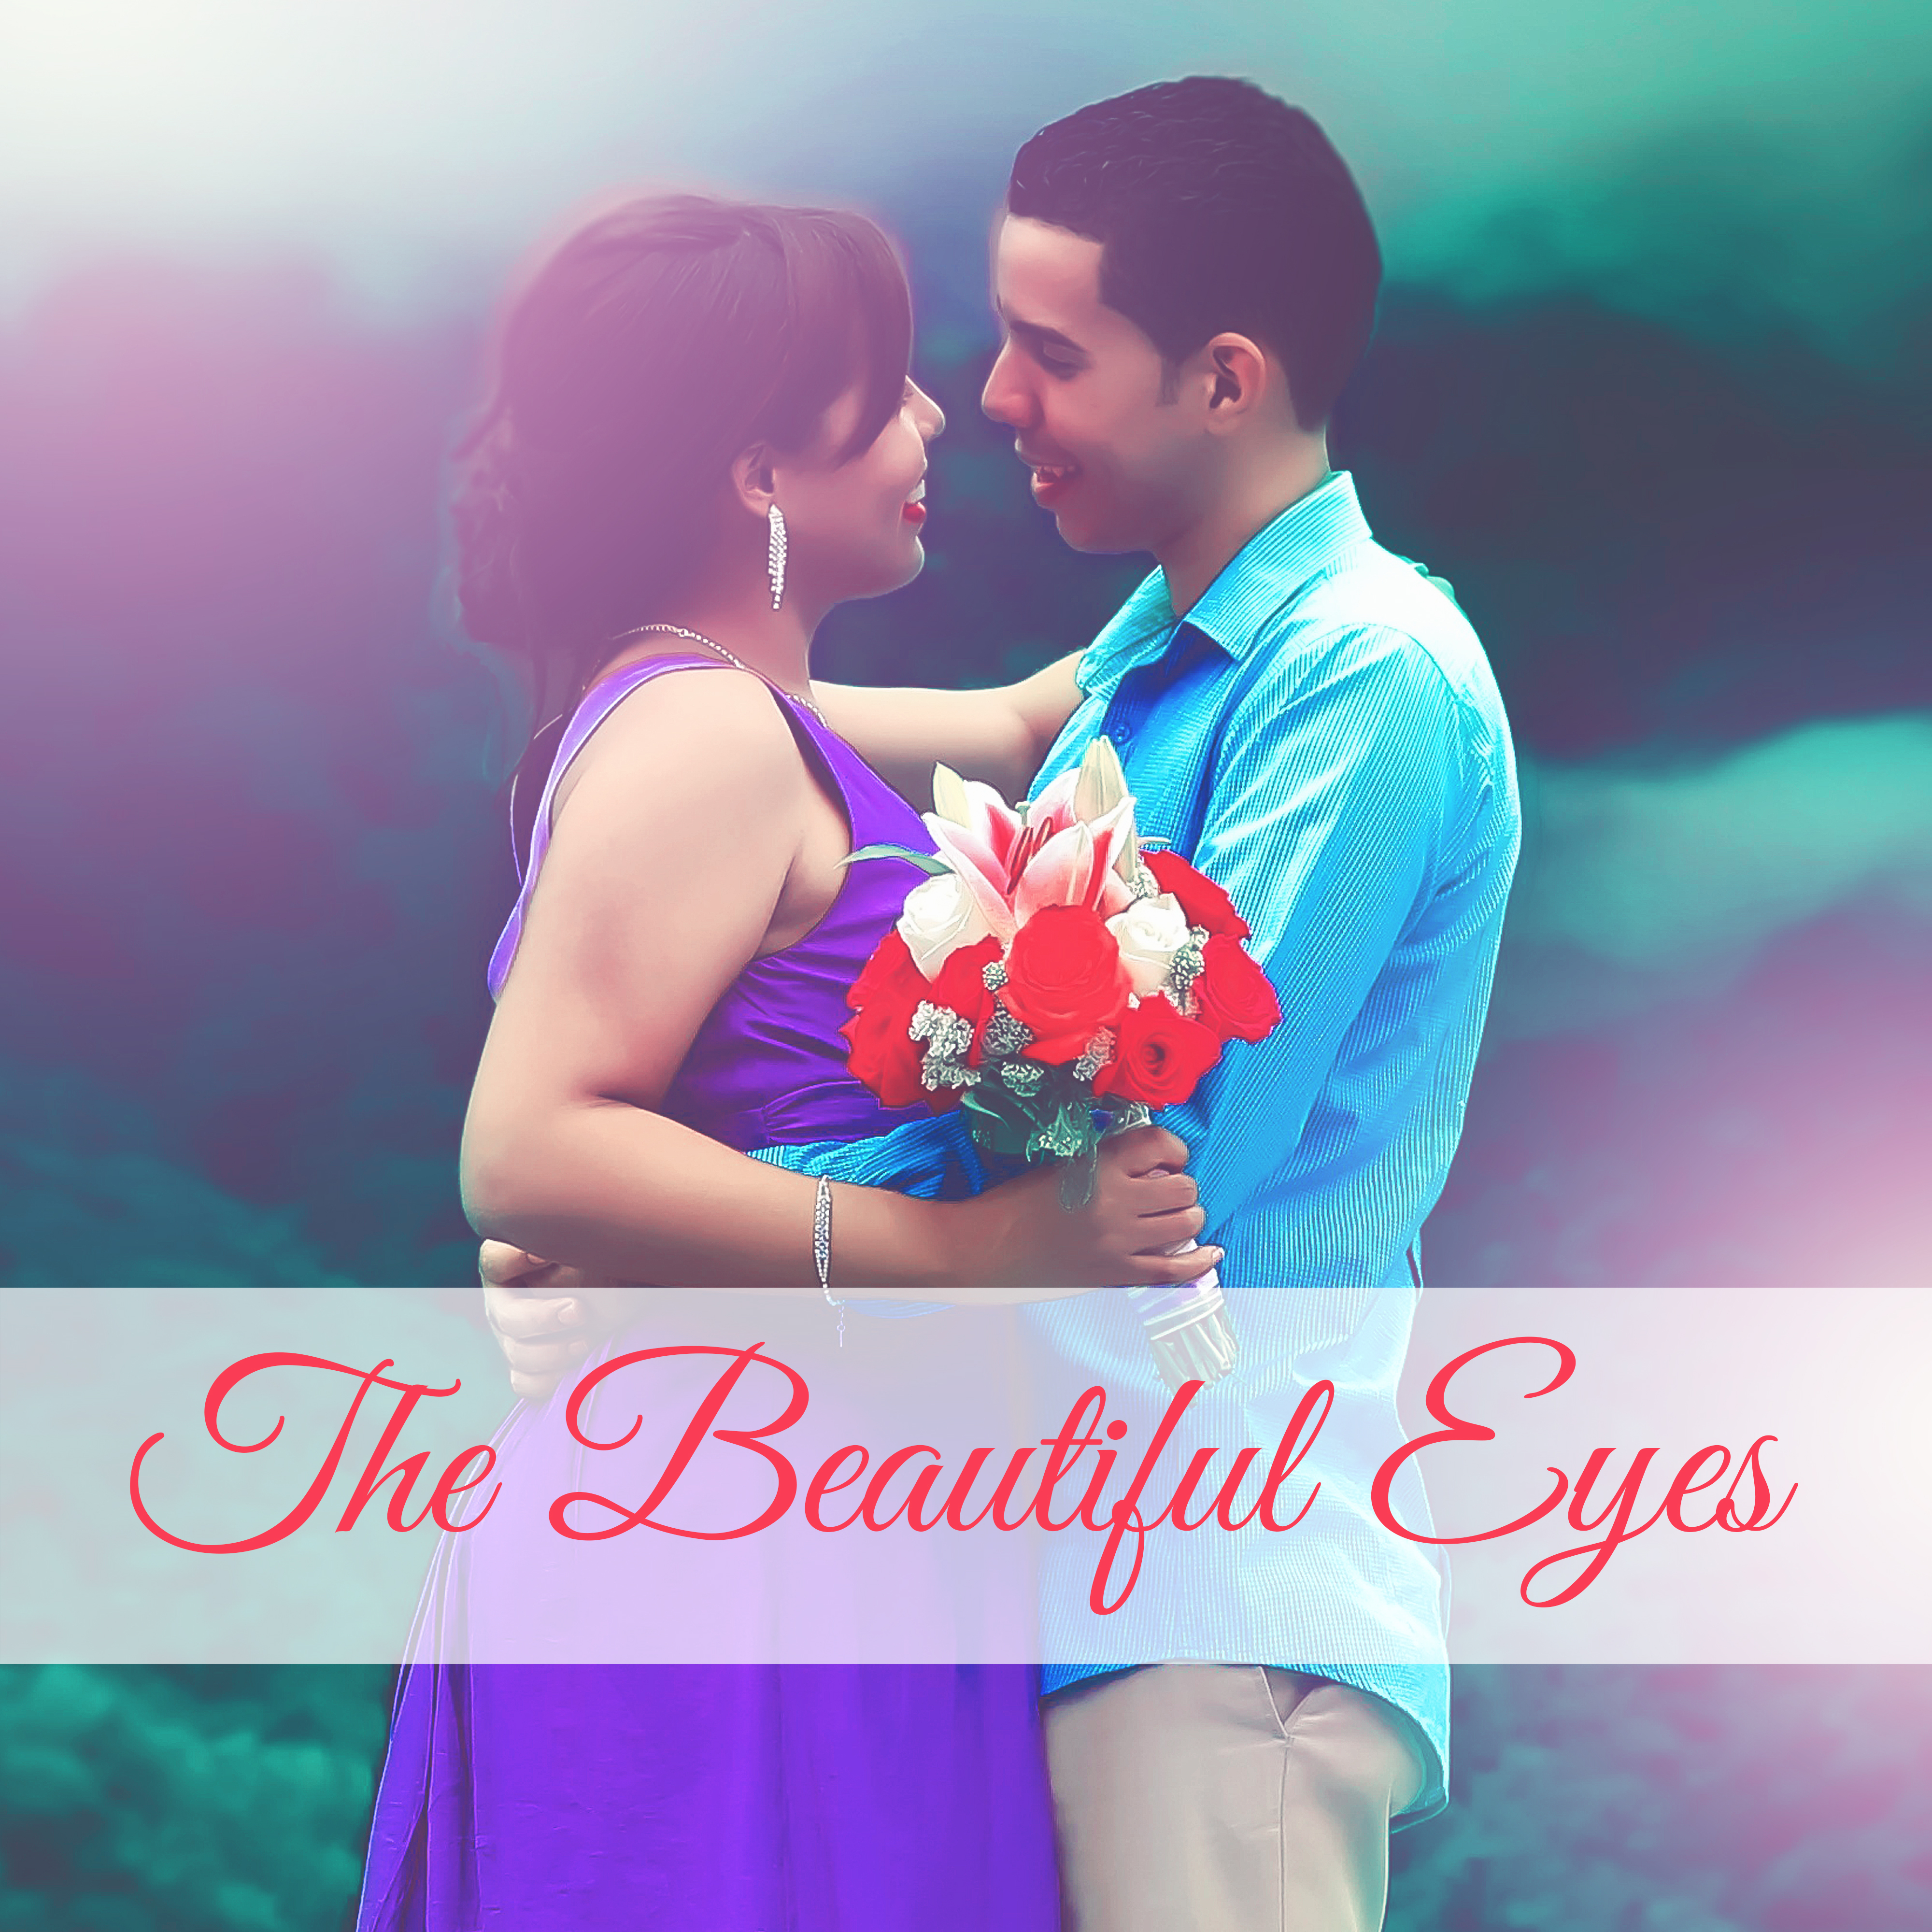 The Beautiful Eyes – Alluring, Charming, Hold the Hand, Night Talks, Date, Canlelight, Red Wine, Red Rose